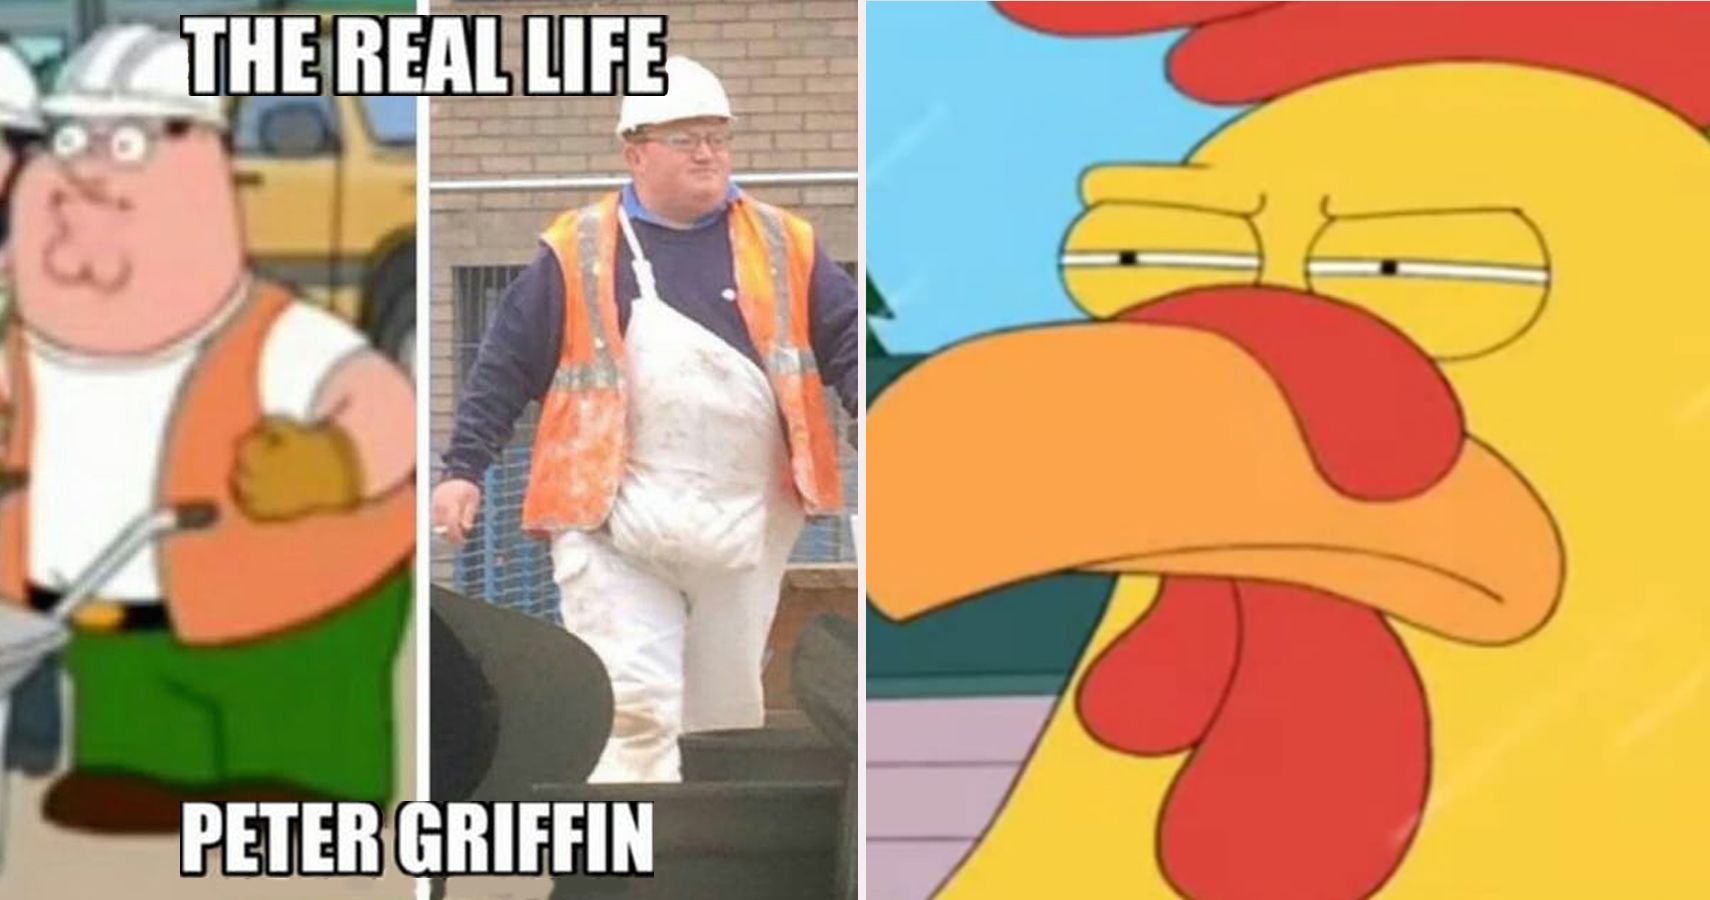 20 Hilarious Family Guy Memes That Would Make Even Stewie Laugh